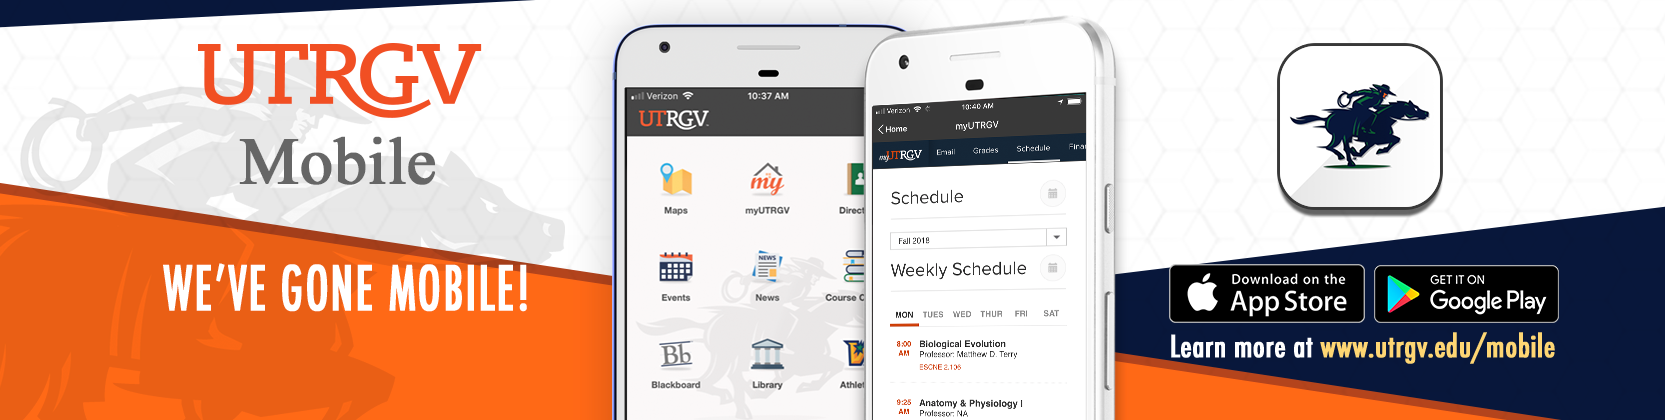 Download the UTRGV mobile app on the App Store and Google Play